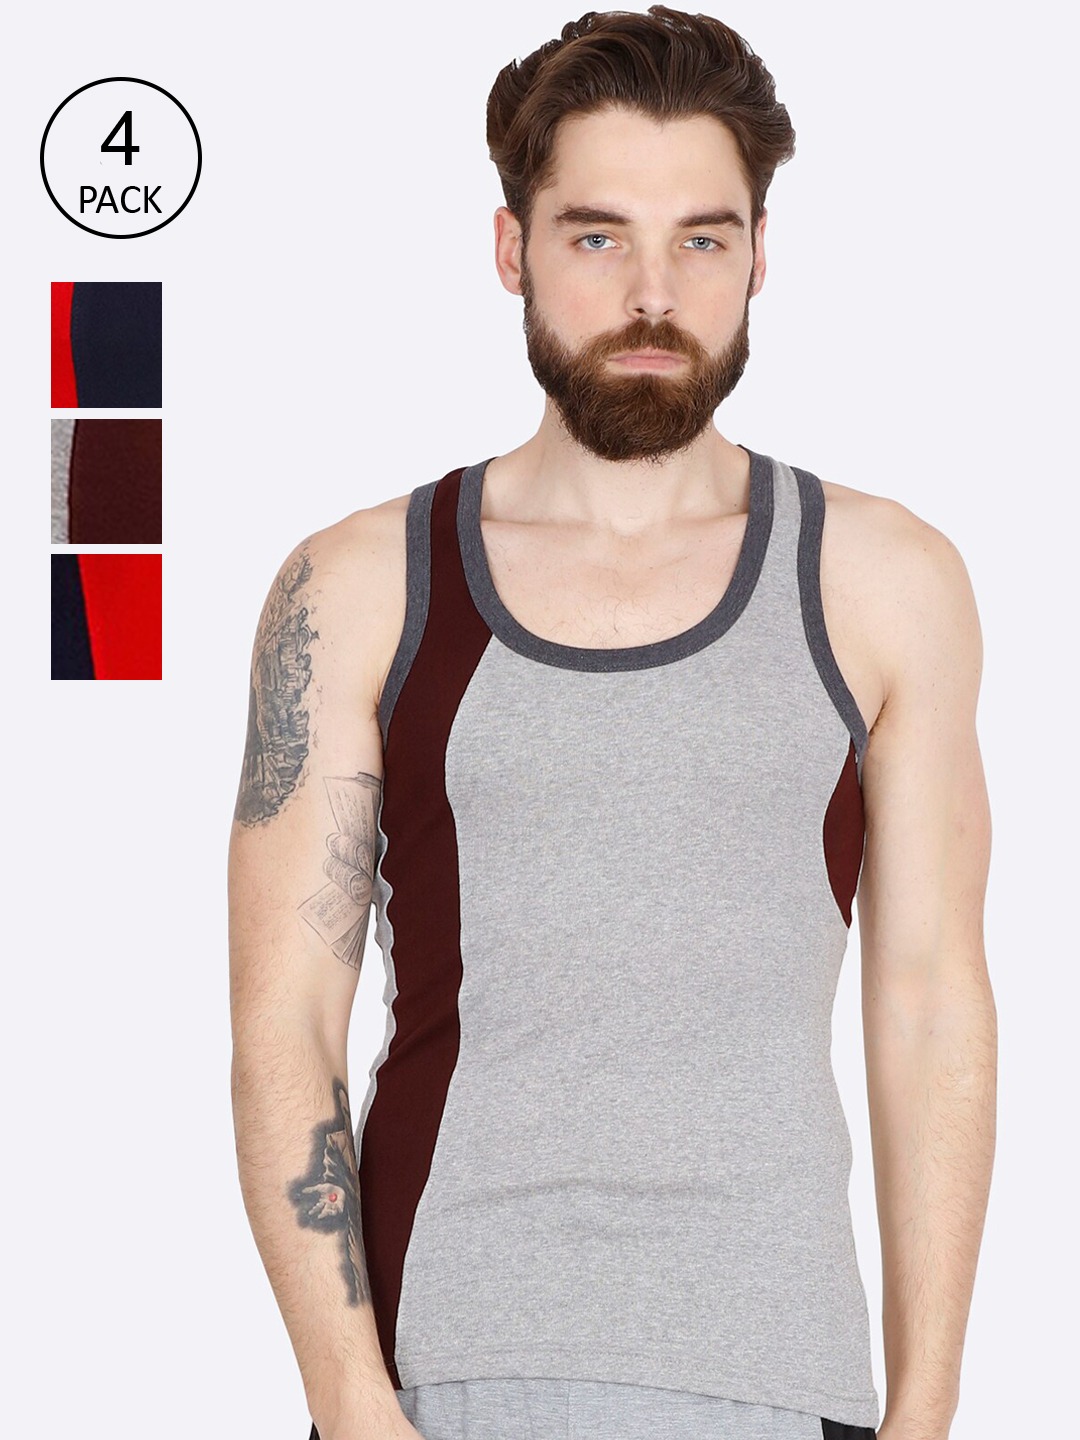 Clothing Innerwear Vests | Genx Men Pack Of 4 Assorted Solid Cotton Gym Vests GENX_GV_7713_AST_4PC - IO61709